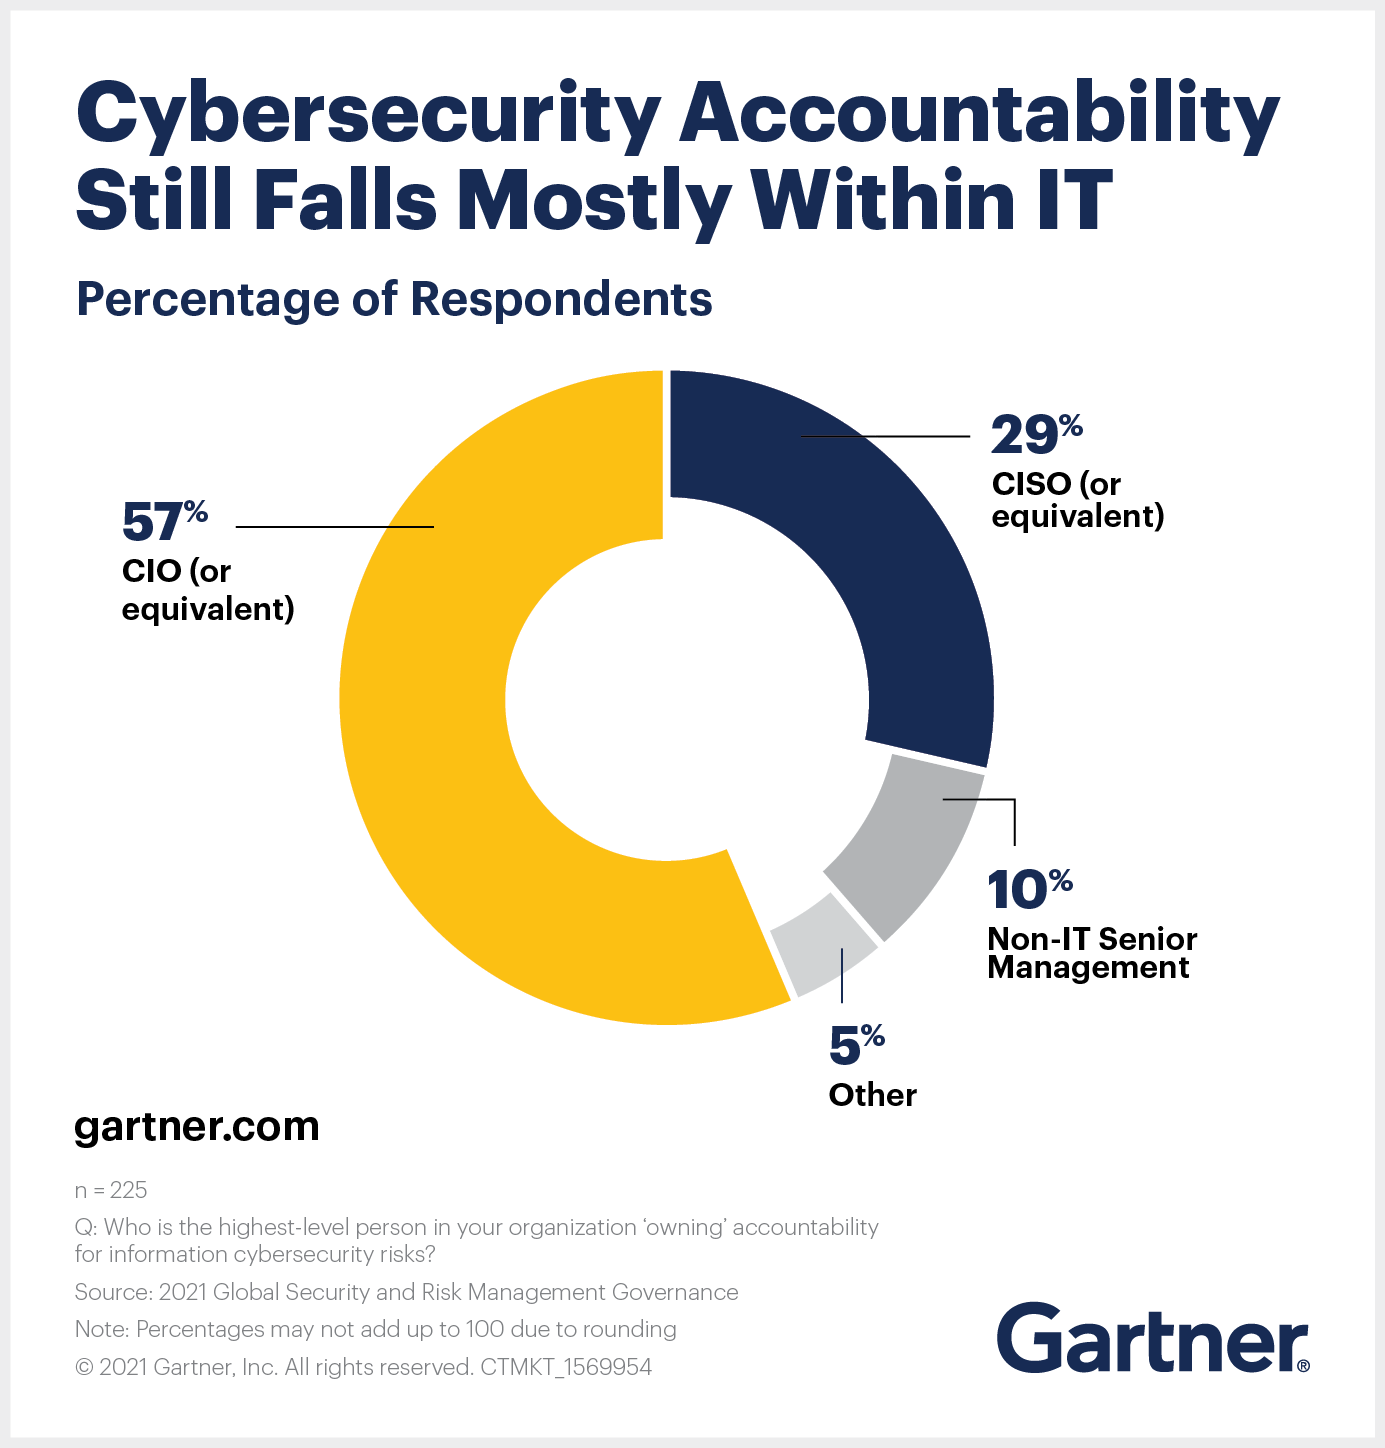 Cybersecurity accountability still falls mostly within IT